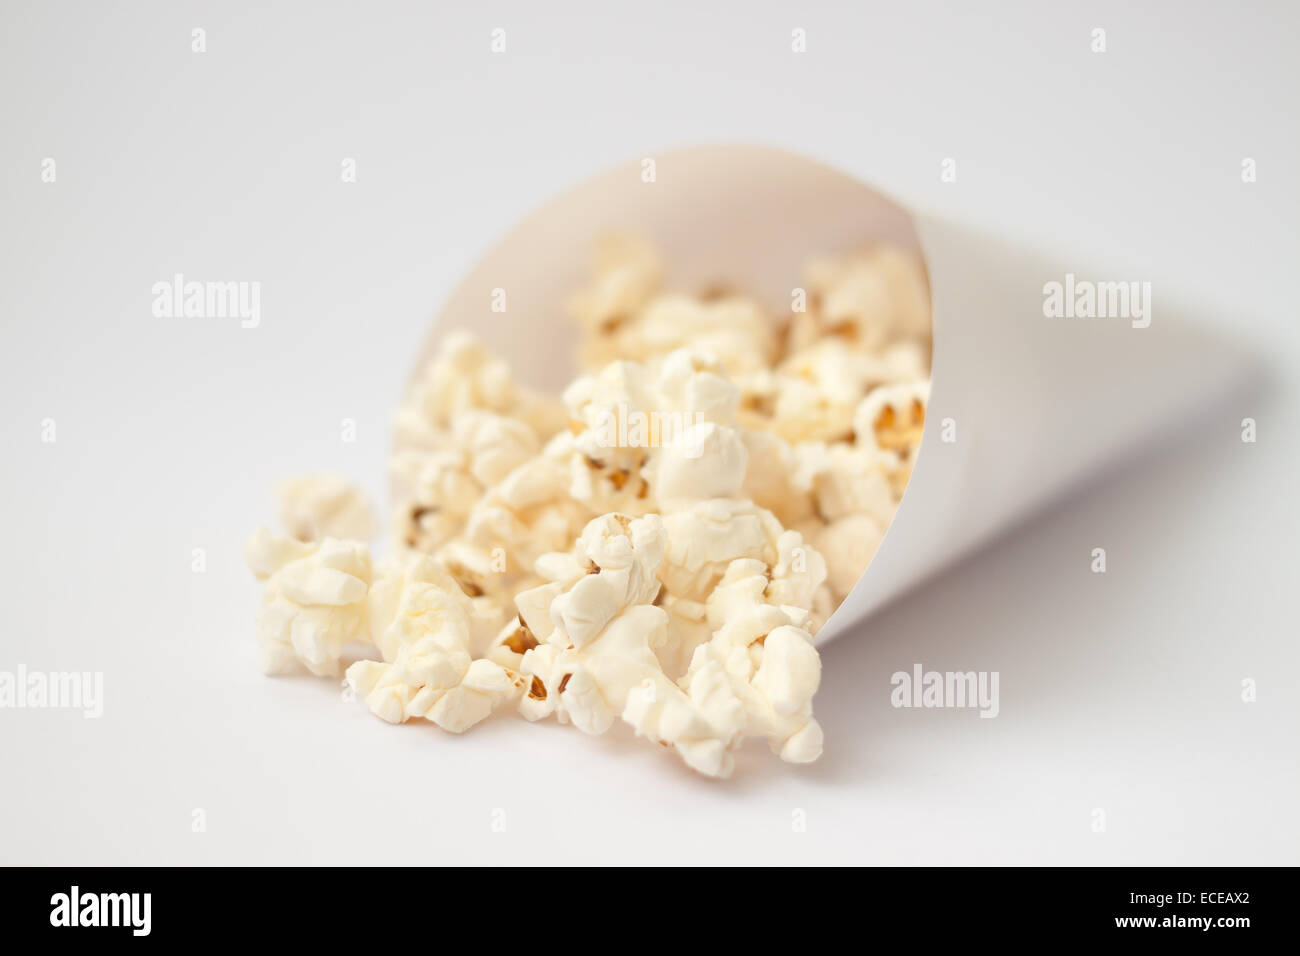 Close up of Pop corn on white background Stock Photo